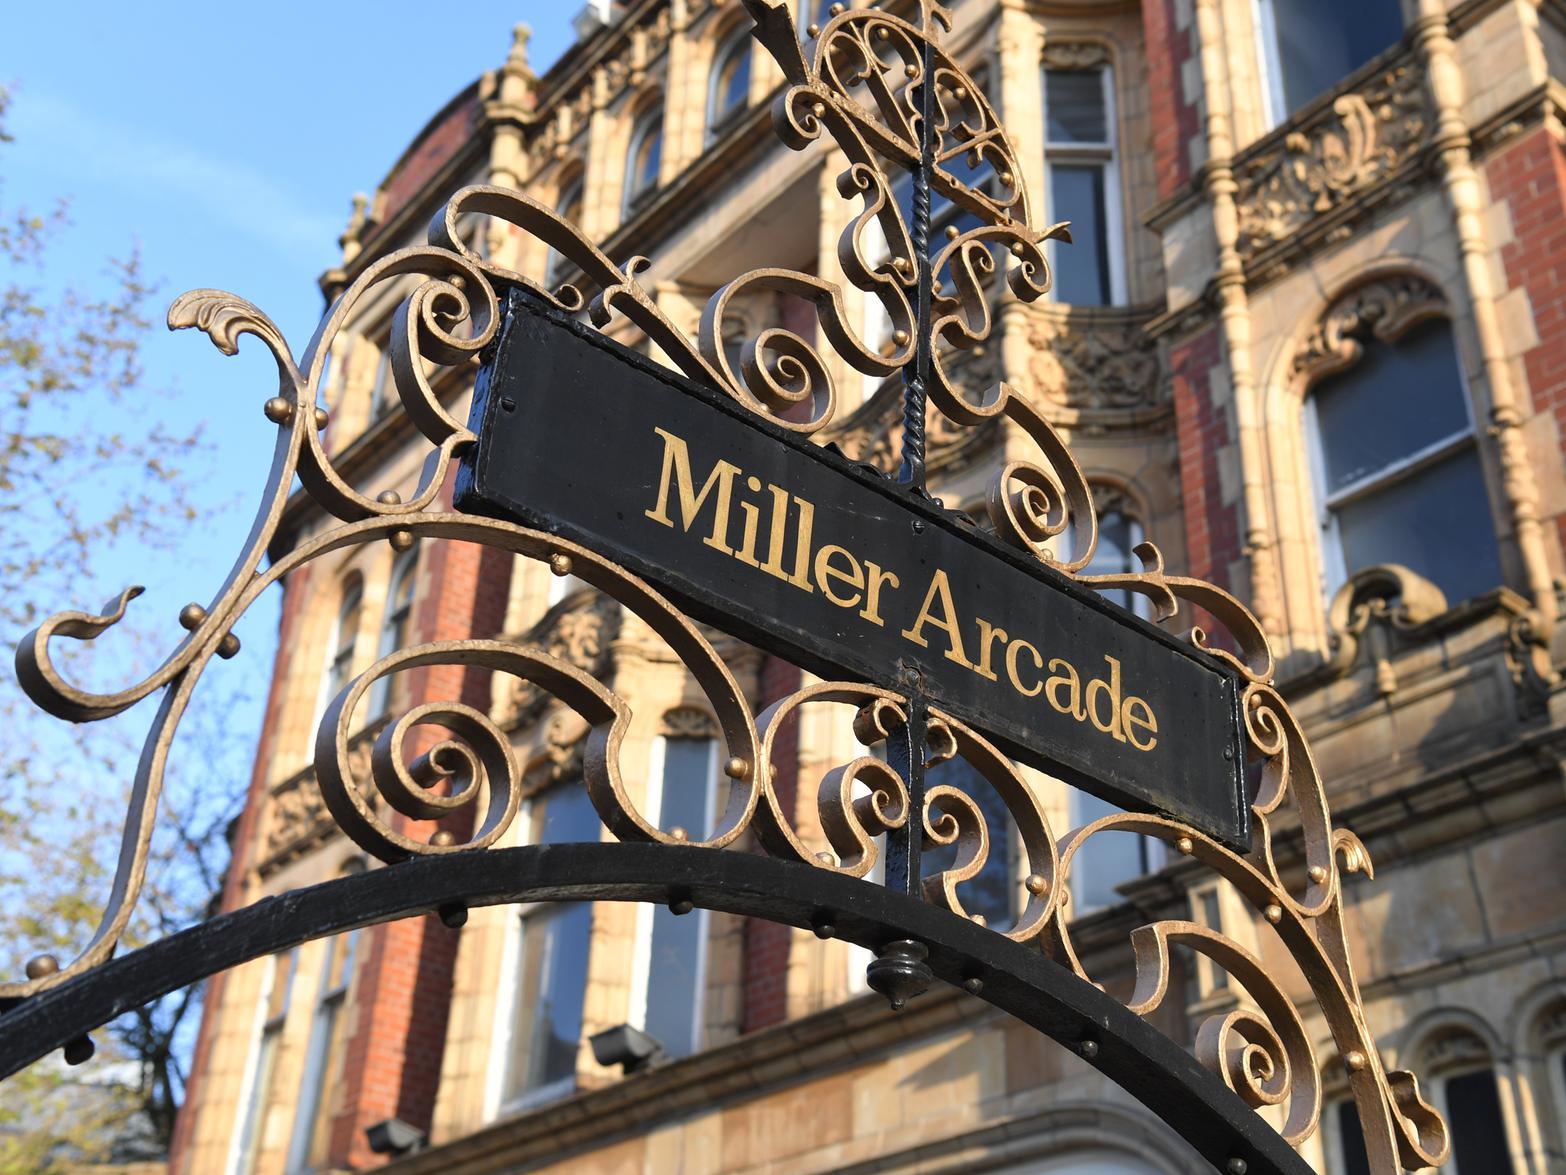 Miller Arcade was Prestons first indoor shopping centre, built in 1899.
The Grade II listed Victorian building is home to a small selection of independent and well known shops, restaurants and bars.